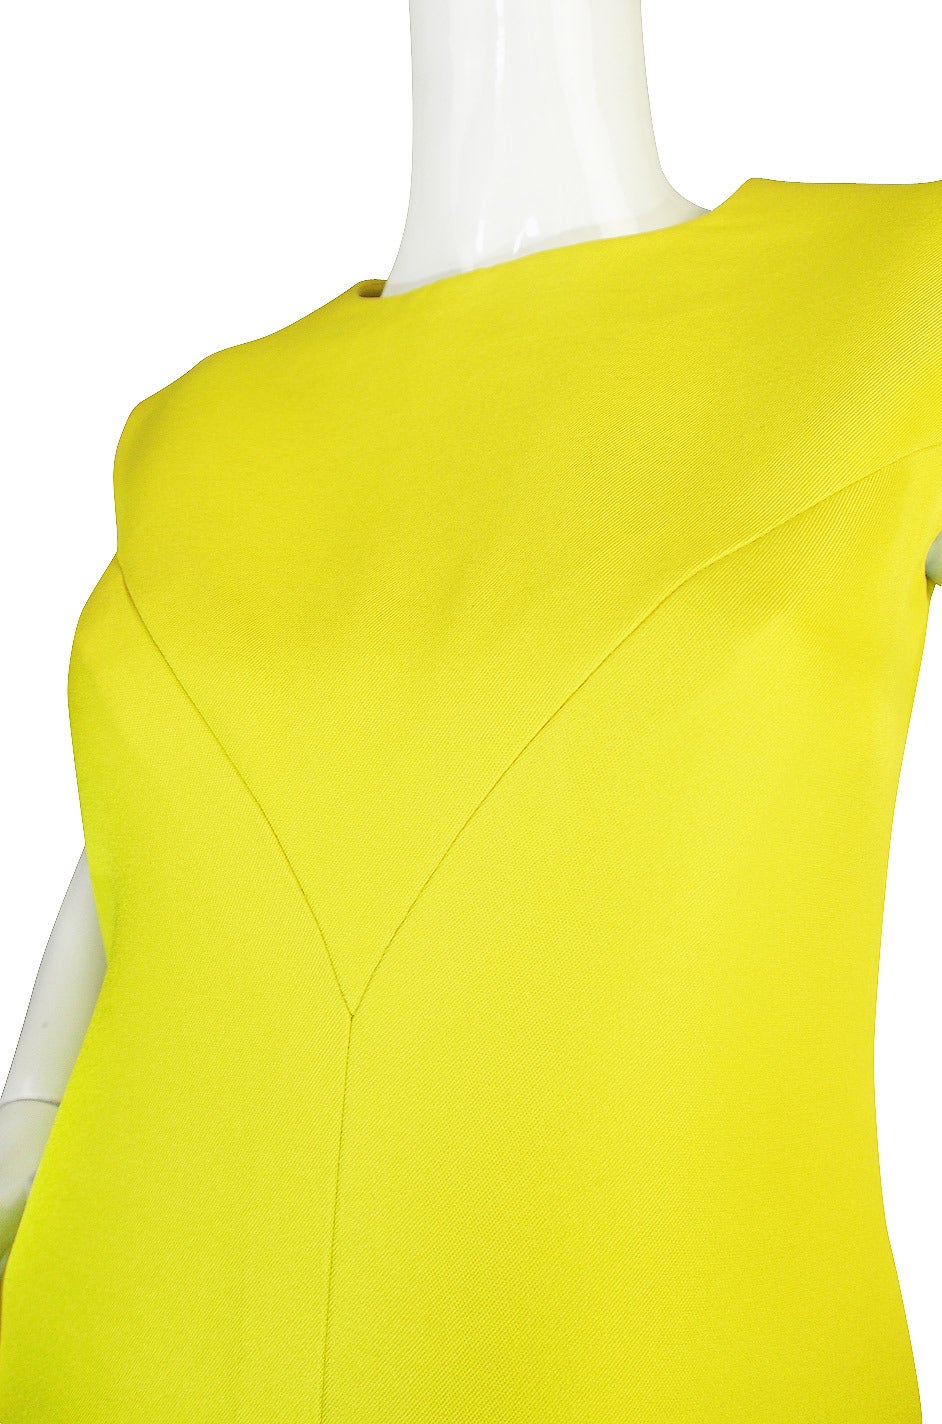 Rare 1960s Custom Sculptural Yellow Givenchy Gown 3